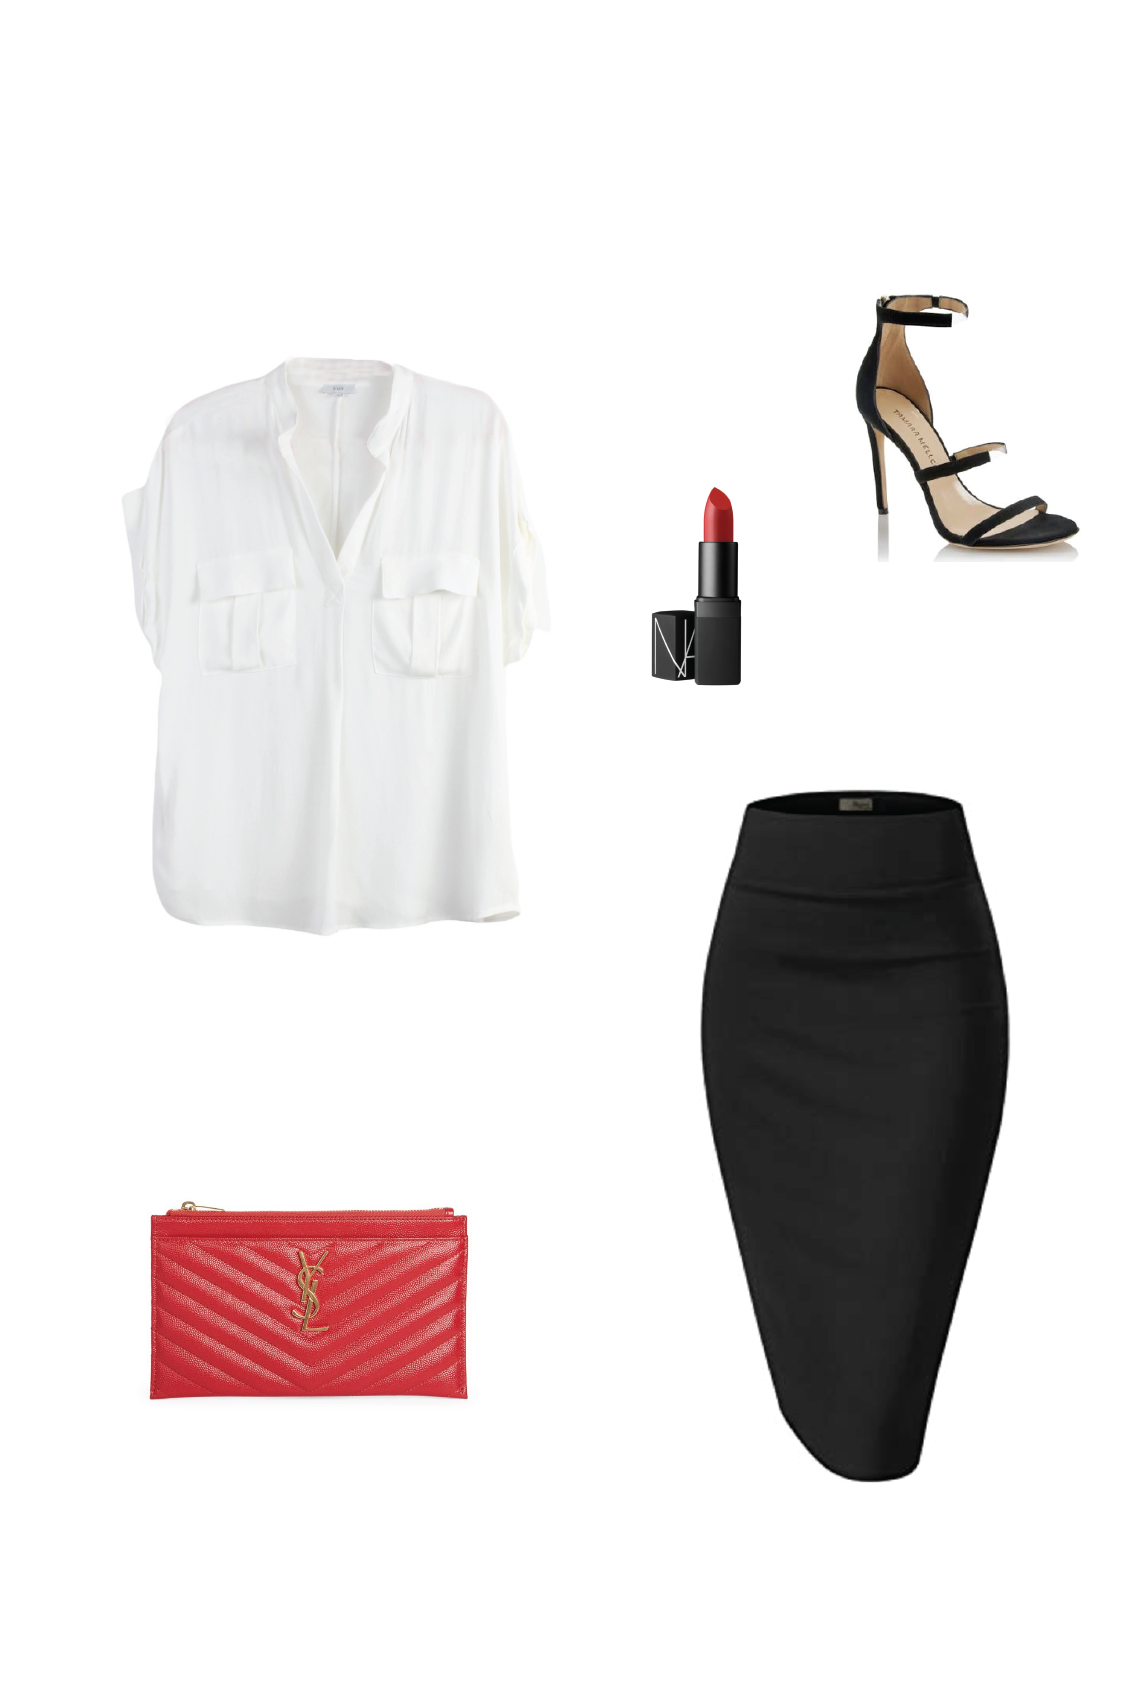 Glow Fashion Boutique white blouse styling for work